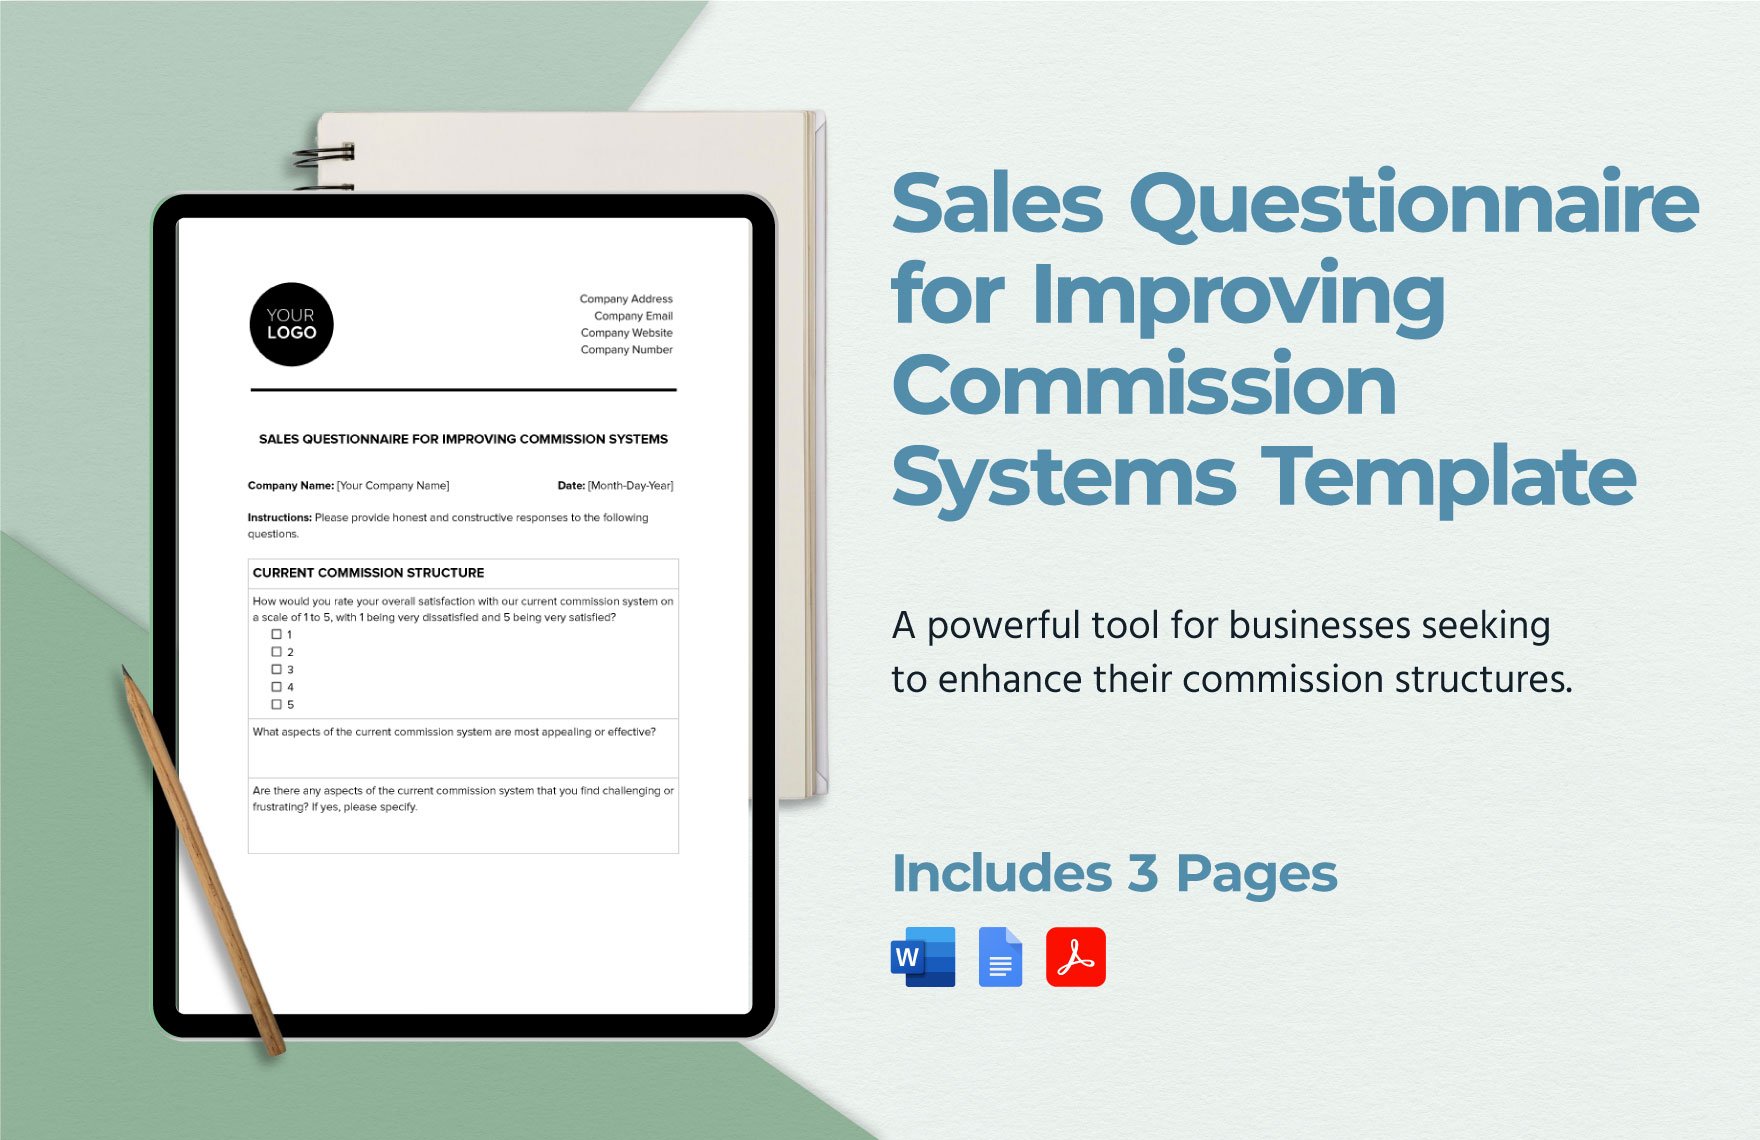 Sales Questionnaire for Improving Commission Systems Template